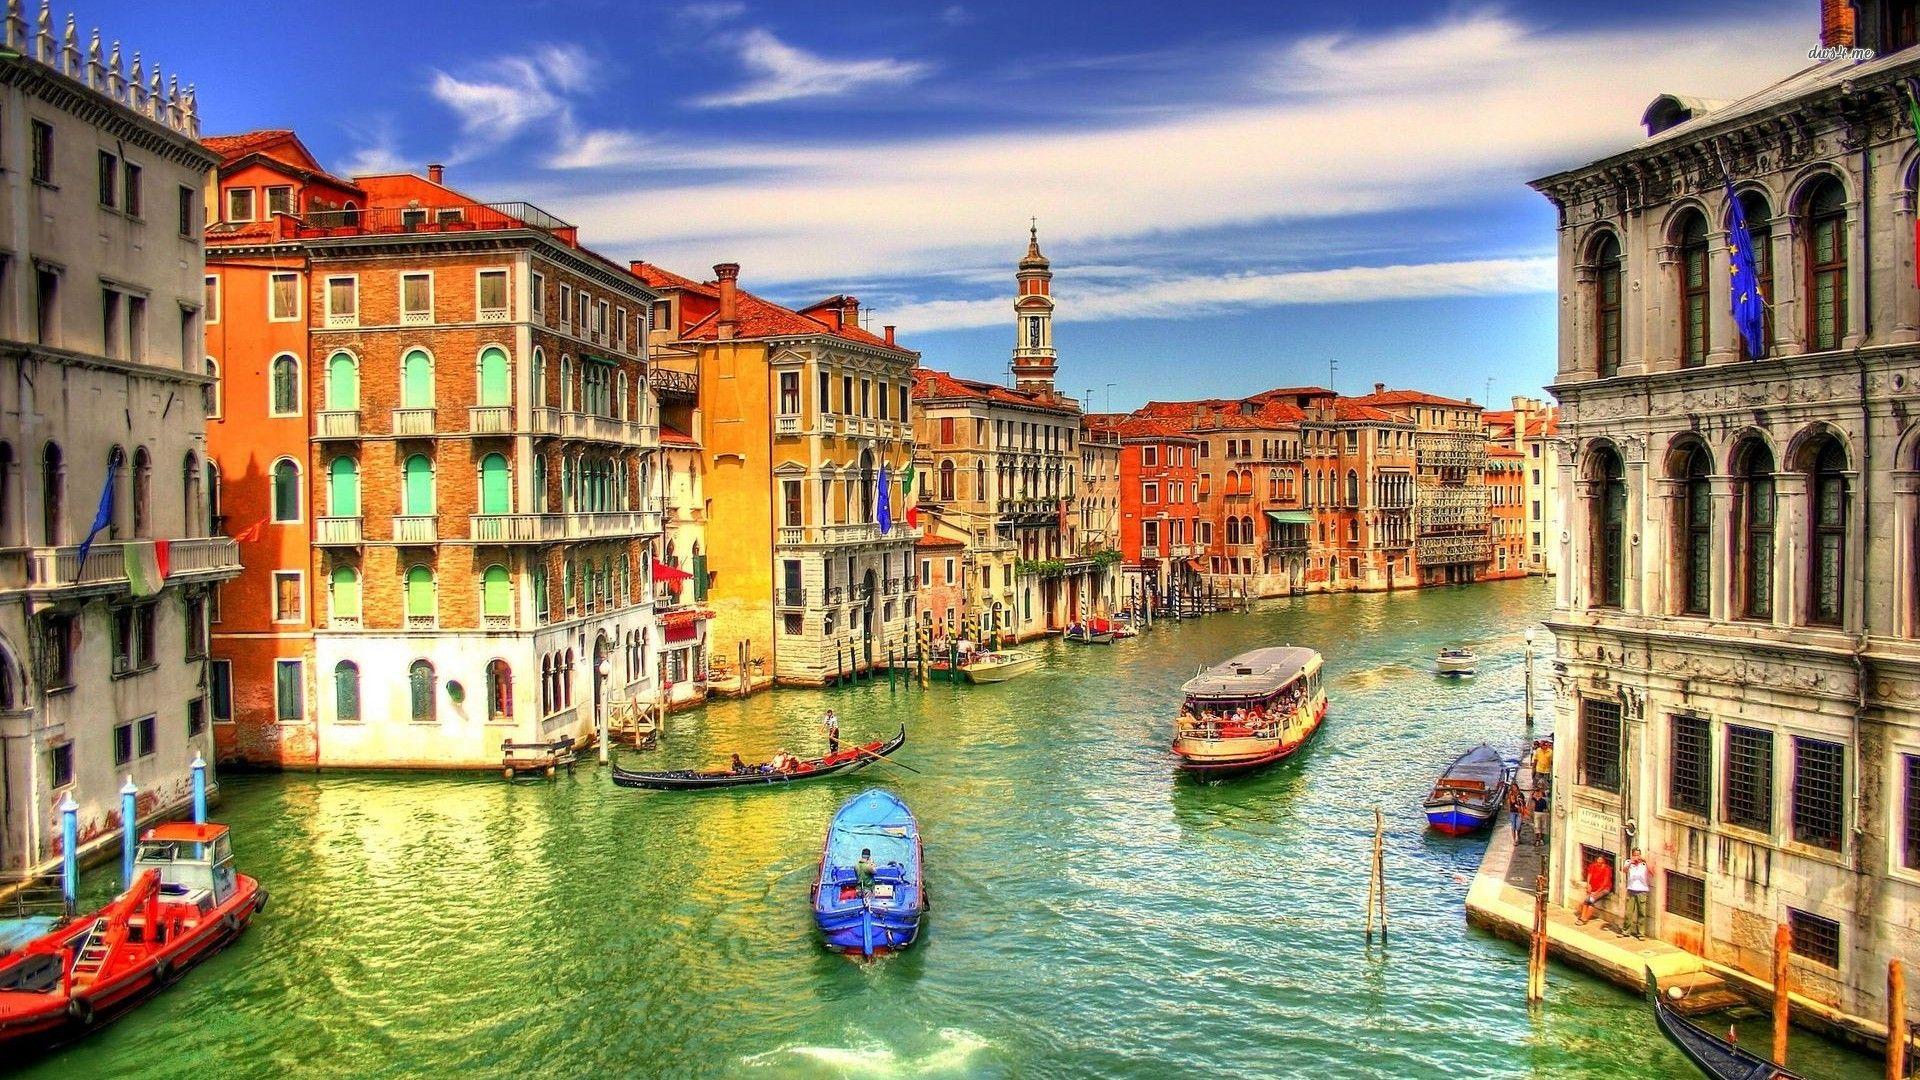 Grand canal wallpapers Wallpapers Wide HD